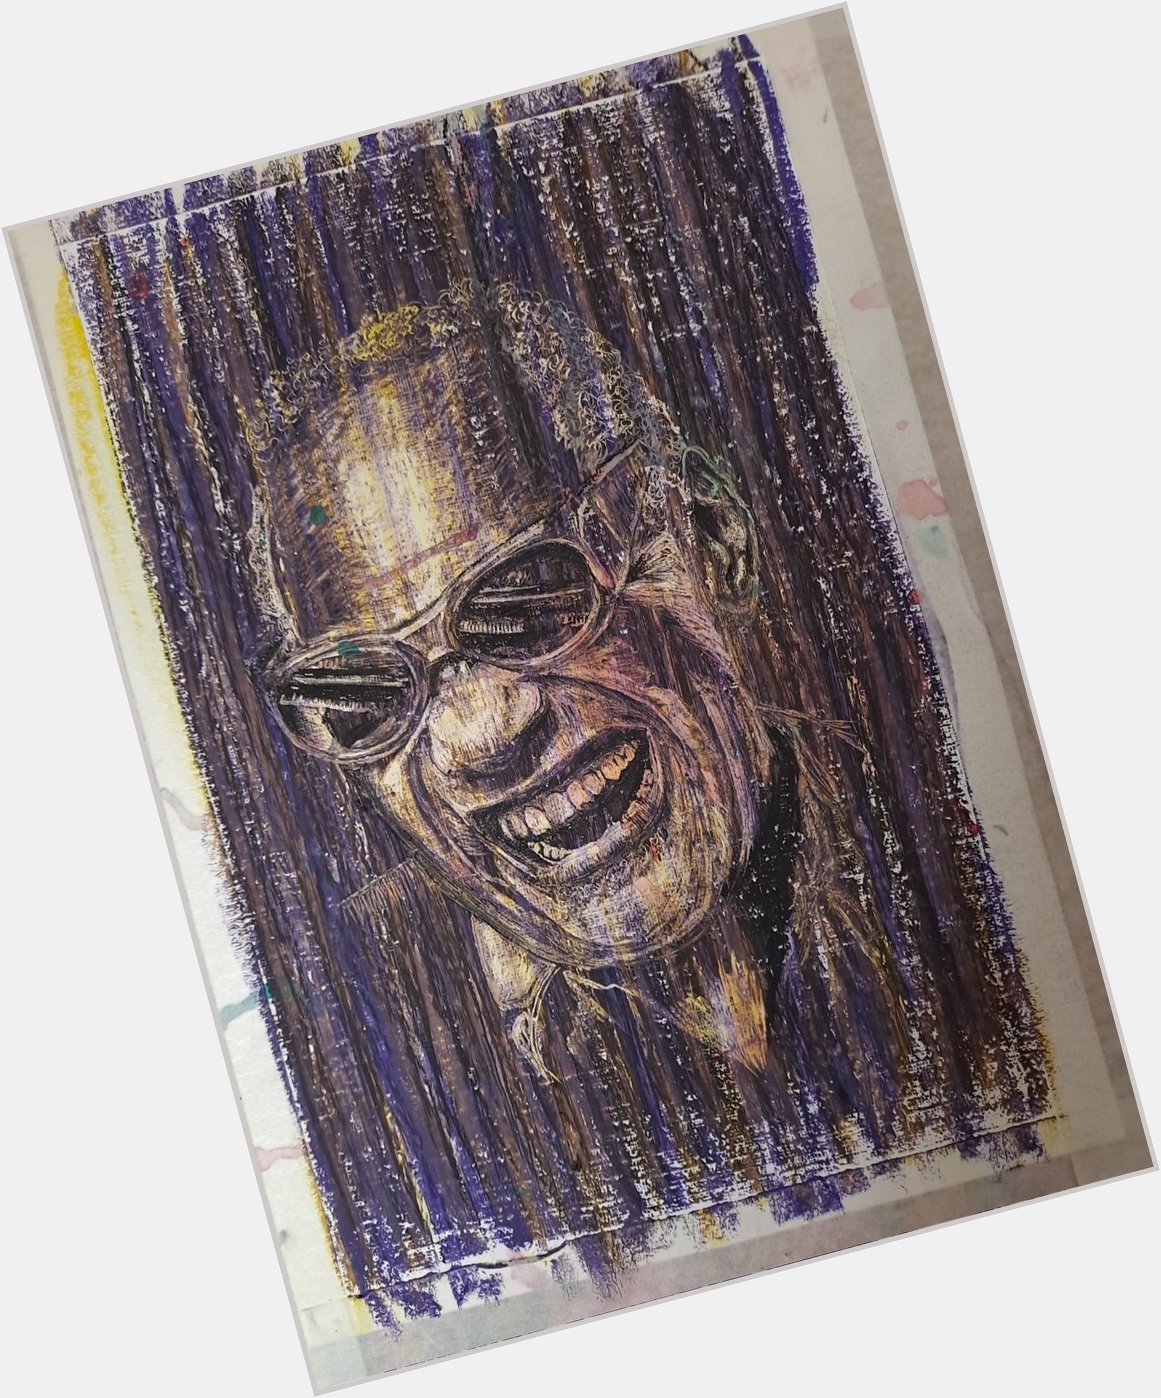 Happy birthday to Ray Charles, born  on this day in 1930.

Oil and ink on acrylic paper, 21cm x 30cm. 